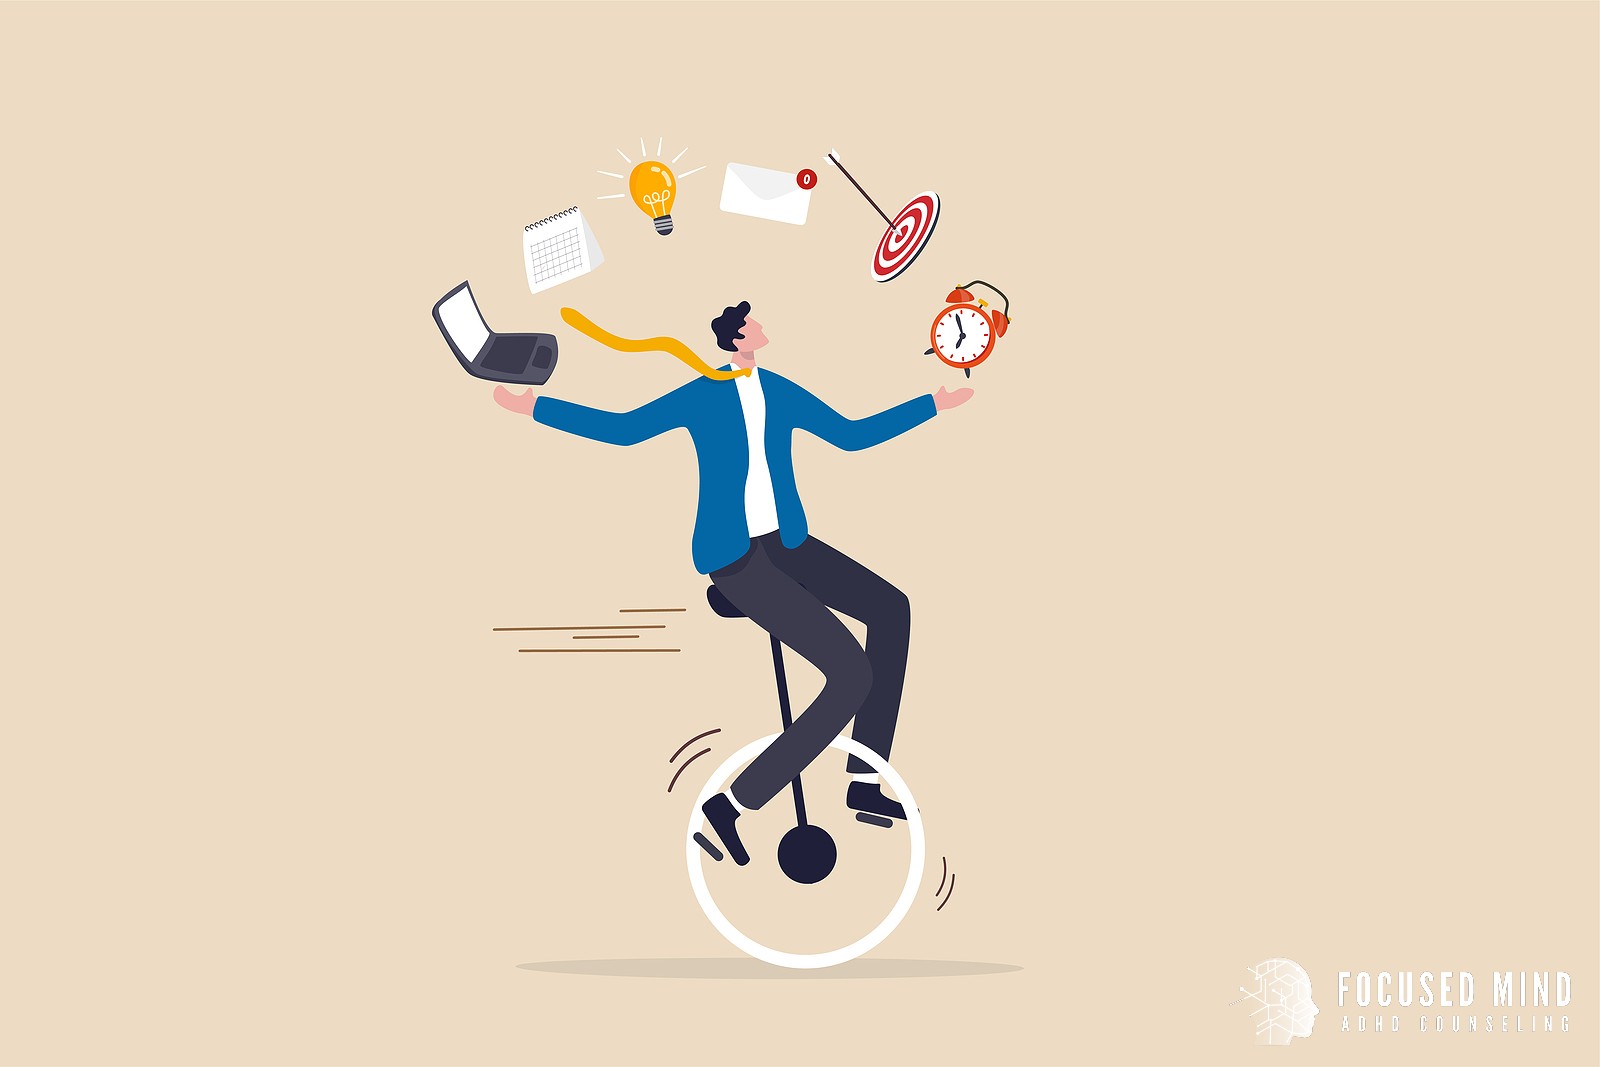 A graphic of a person juggling work responsibilies while on a unicycle. Focused Mind ADHD Counseling can offer support for ADHD and workaholism. Contact an adult ADHD for support with ADHD productivity hacks. 43016 | 43017 | 43235